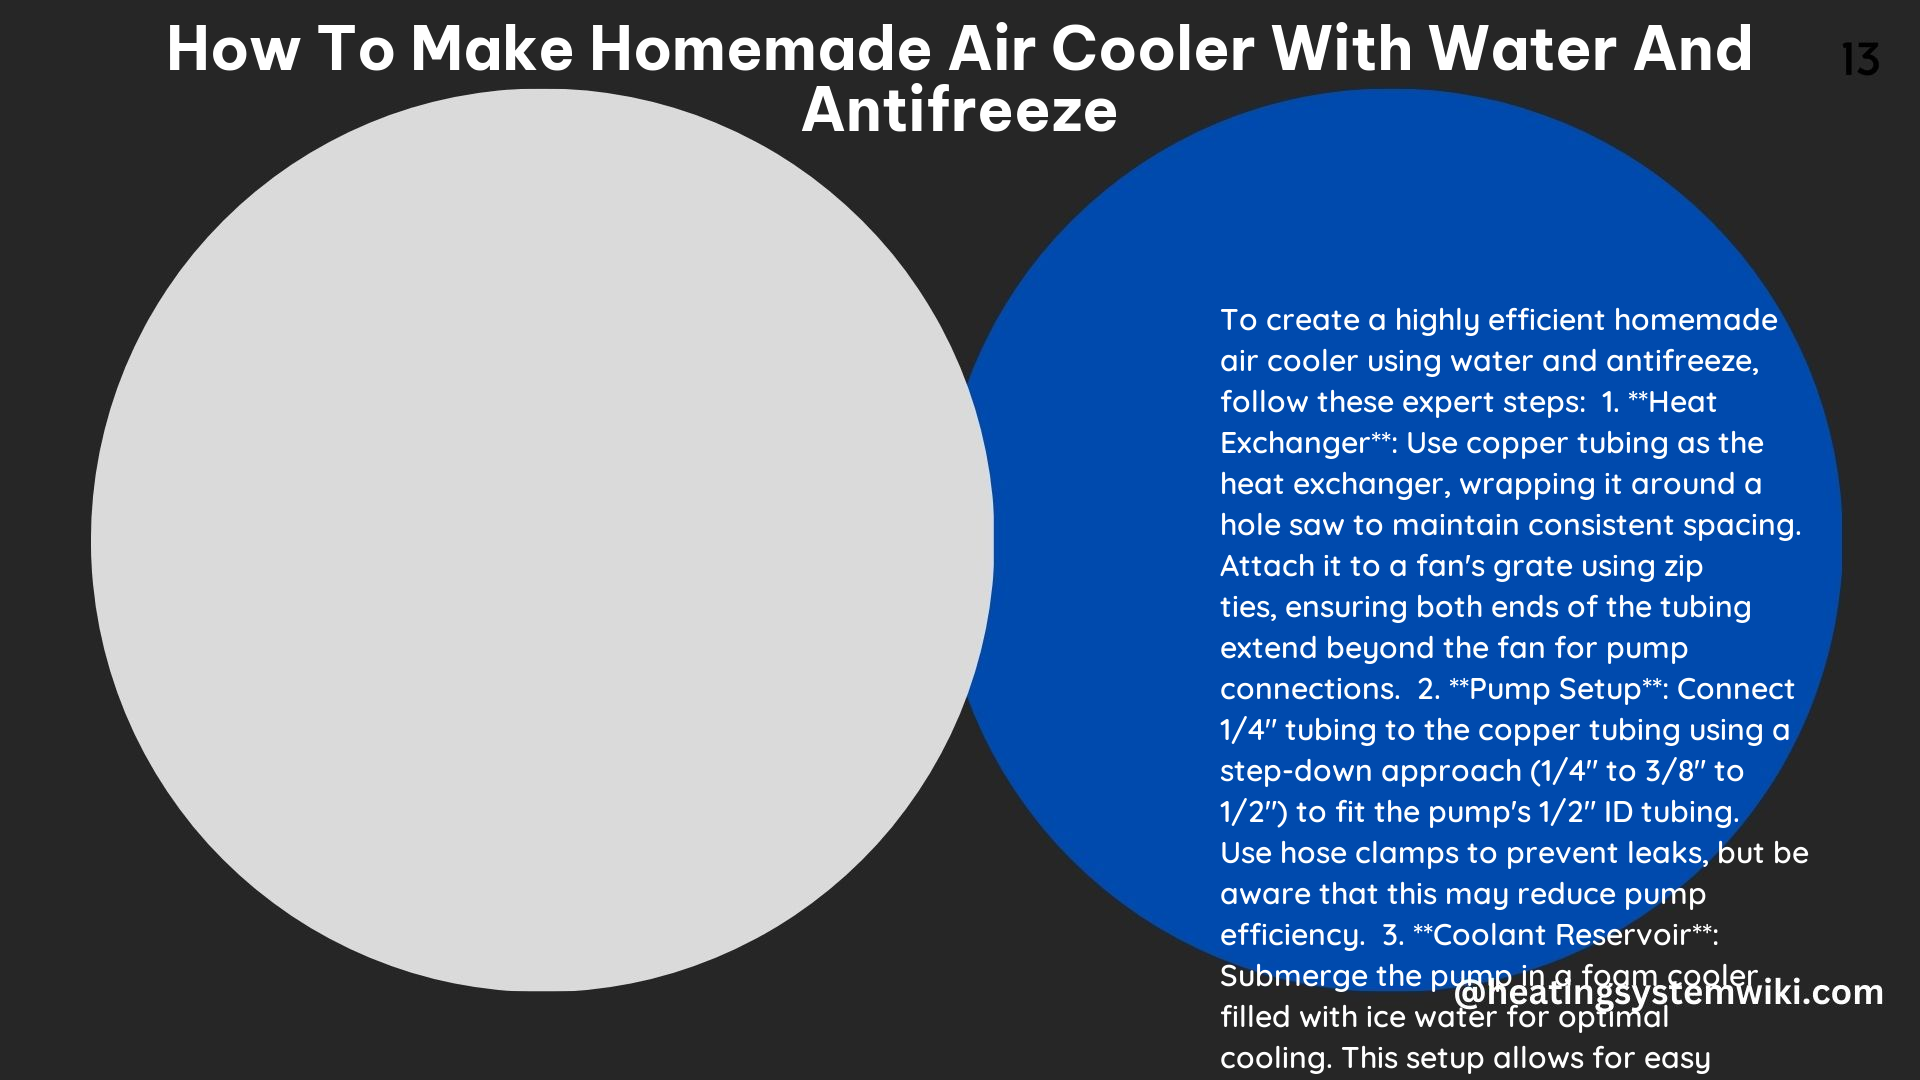 How to Make Homemade Air Cooler With Water and Antifreeze